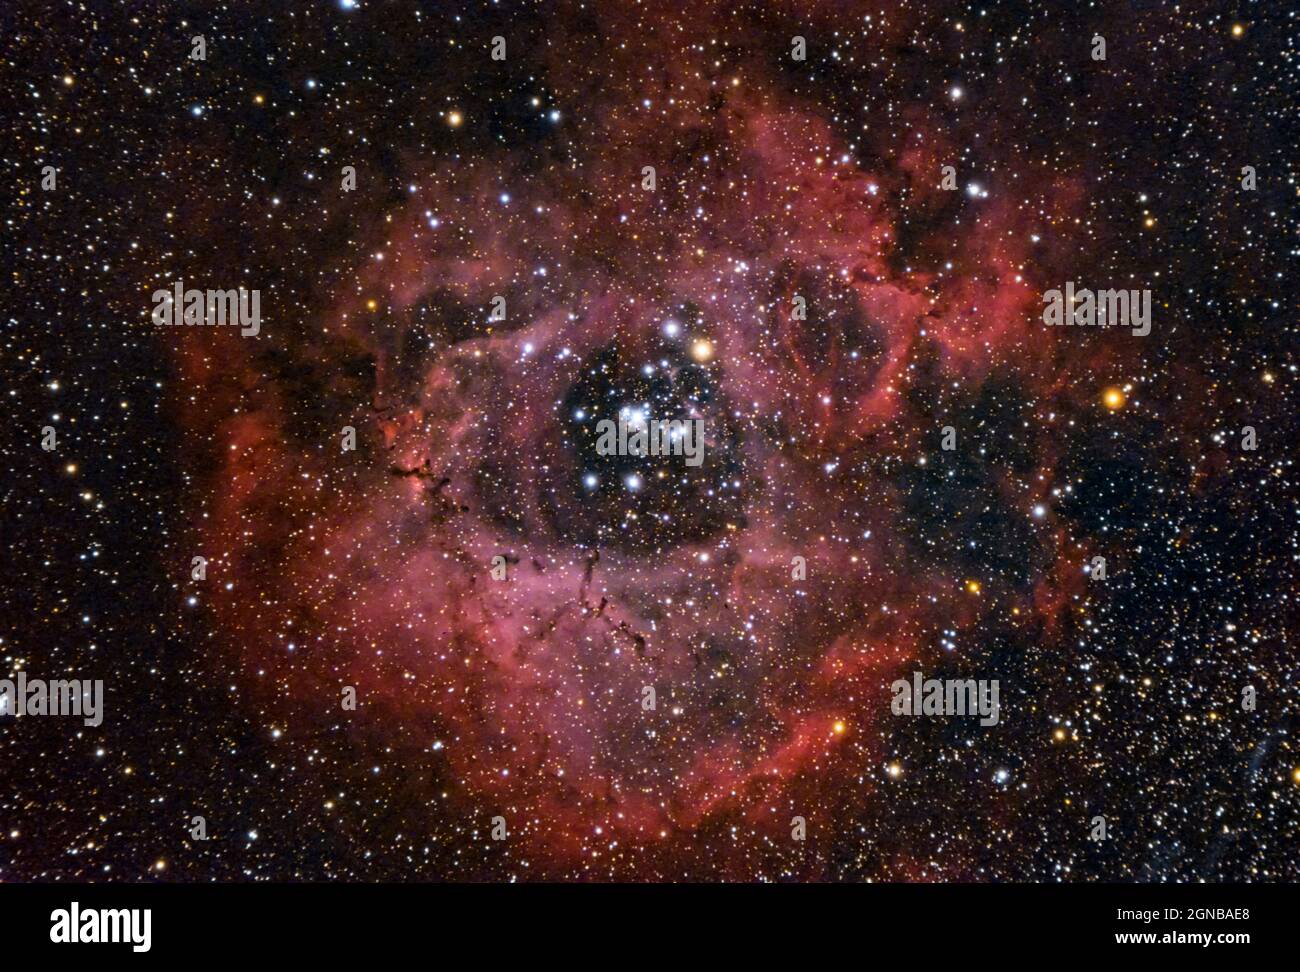 The Rosette Nebula  is an H II region located near one end of a giant molecular cloud in the Monoceros region of the Milky Way Galaxy. Stock Photo